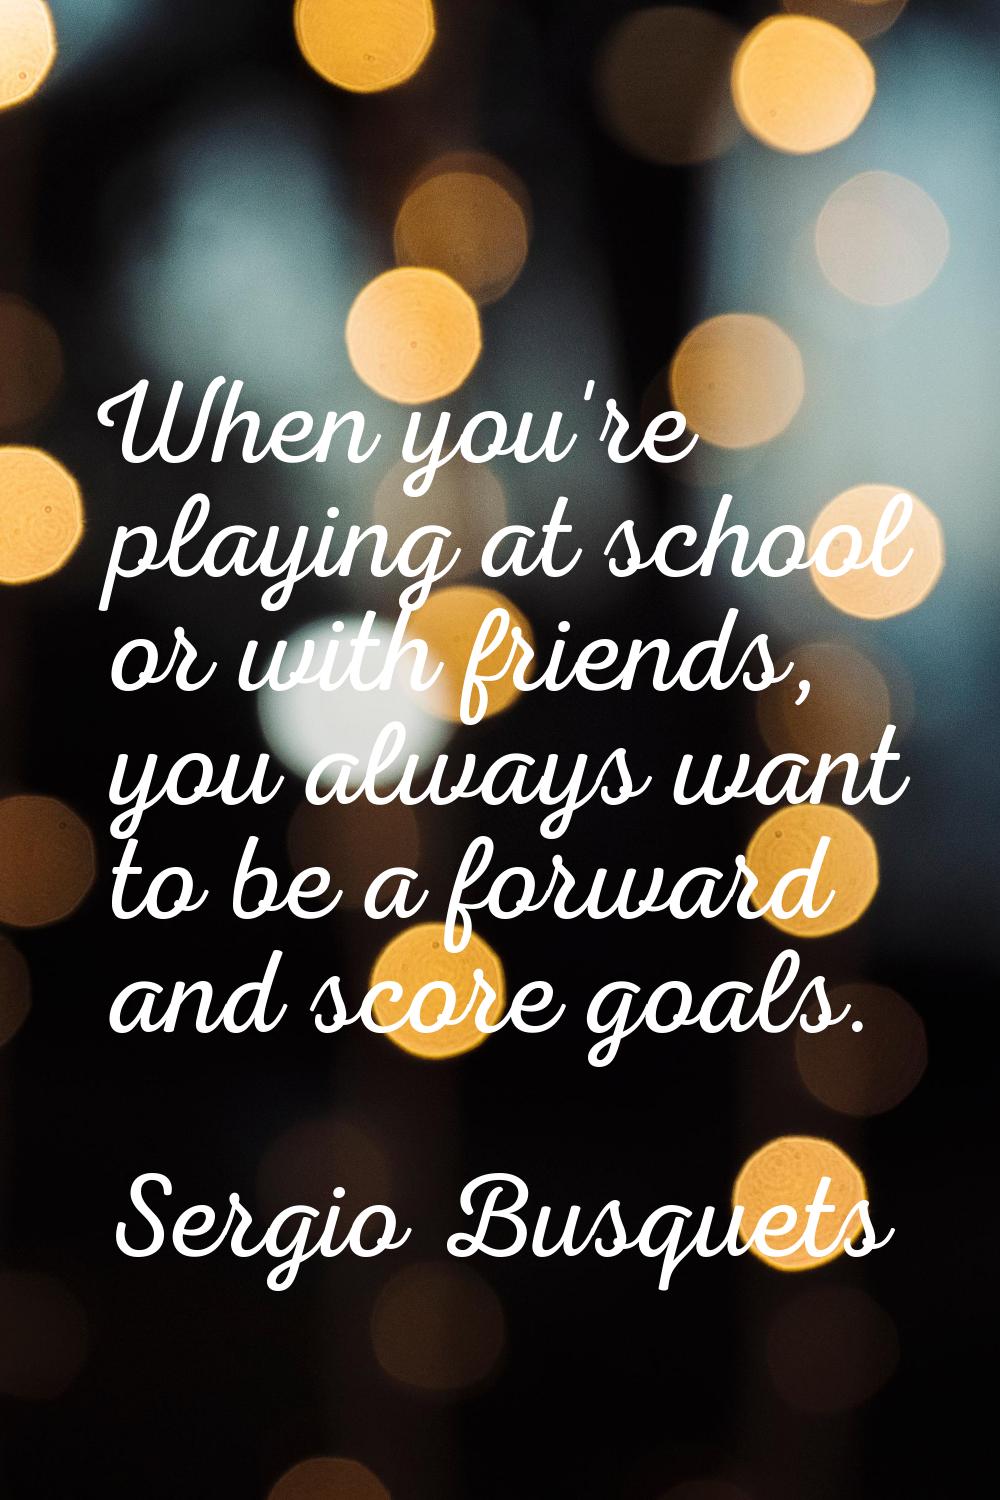 When you're playing at school or with friends, you always want to be a forward and score goals.